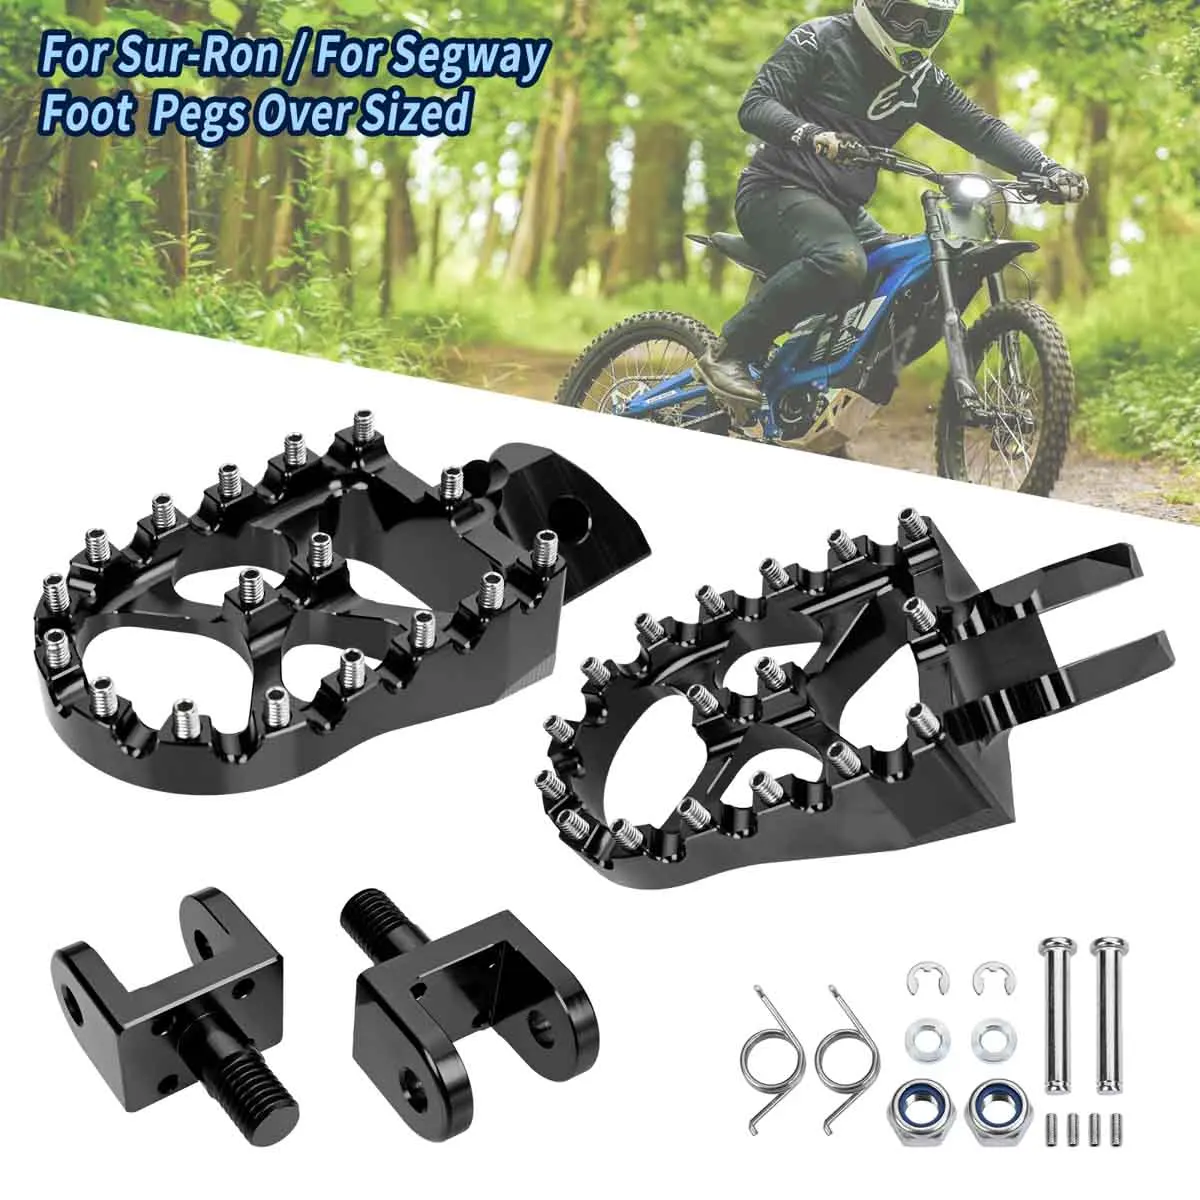 

For Surron for Sur-Ron Light Bee X LBX Off-Road Electric Vehicle Footpeg Foot Pegs Rests Pedals For Segway X160 & X260